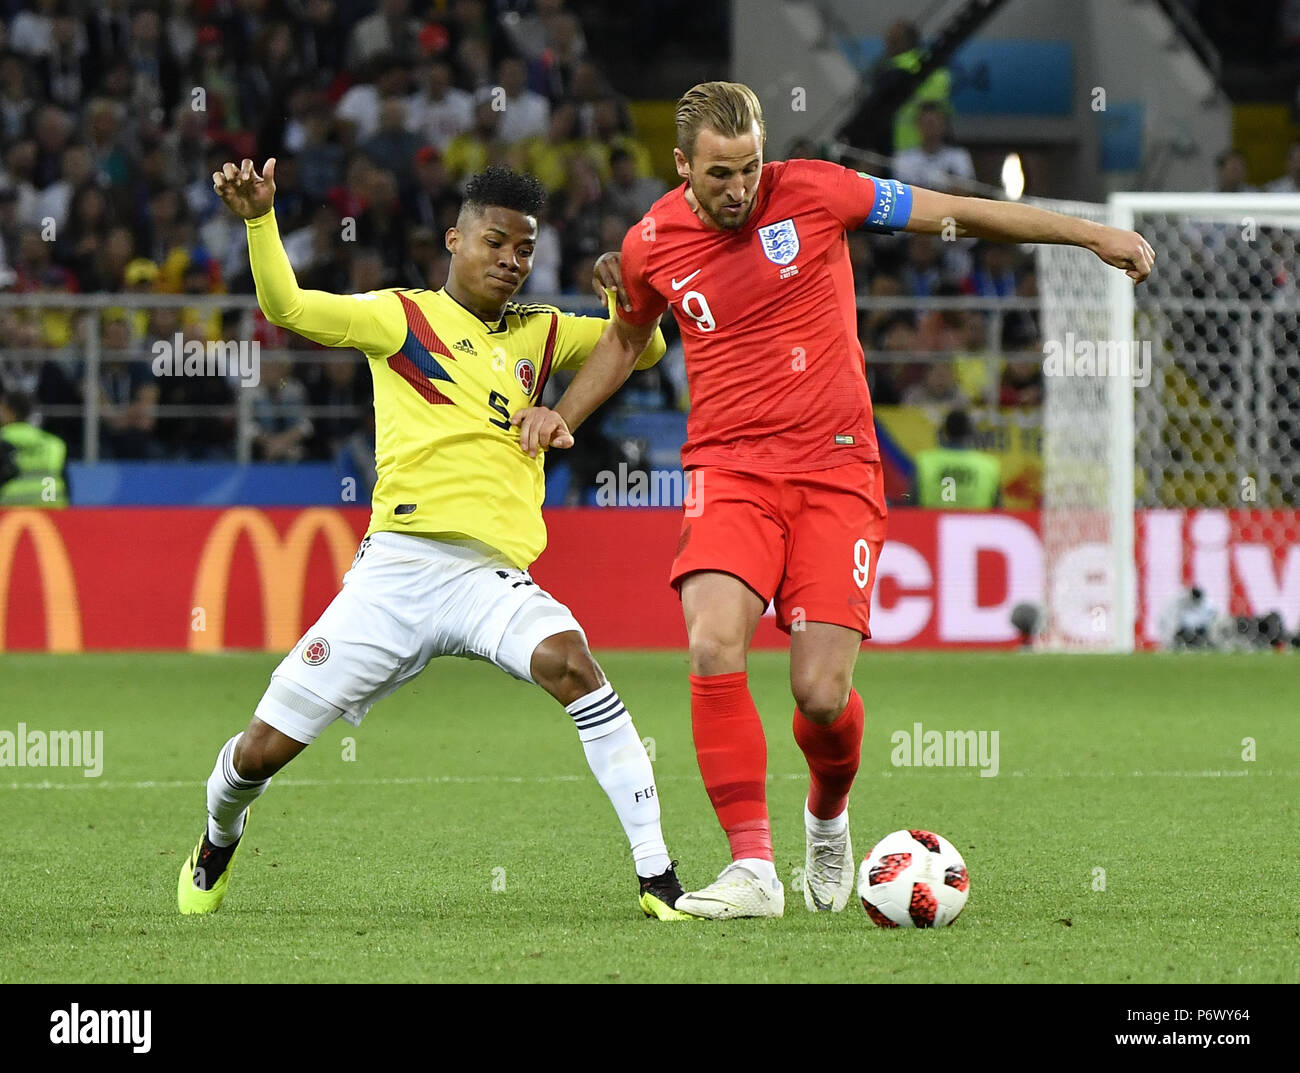 Moscow, Russia. 3rd July, 2018. Harry Kane (R) of England vies with Wilmar Barrios of Colombia during the 2018 FIFA World Cup round of 16 match between England and Colombia in Moscow, Russia, July 3, 2018. Credit: He Canling/Xinhua/Alamy Live News Stock Photo